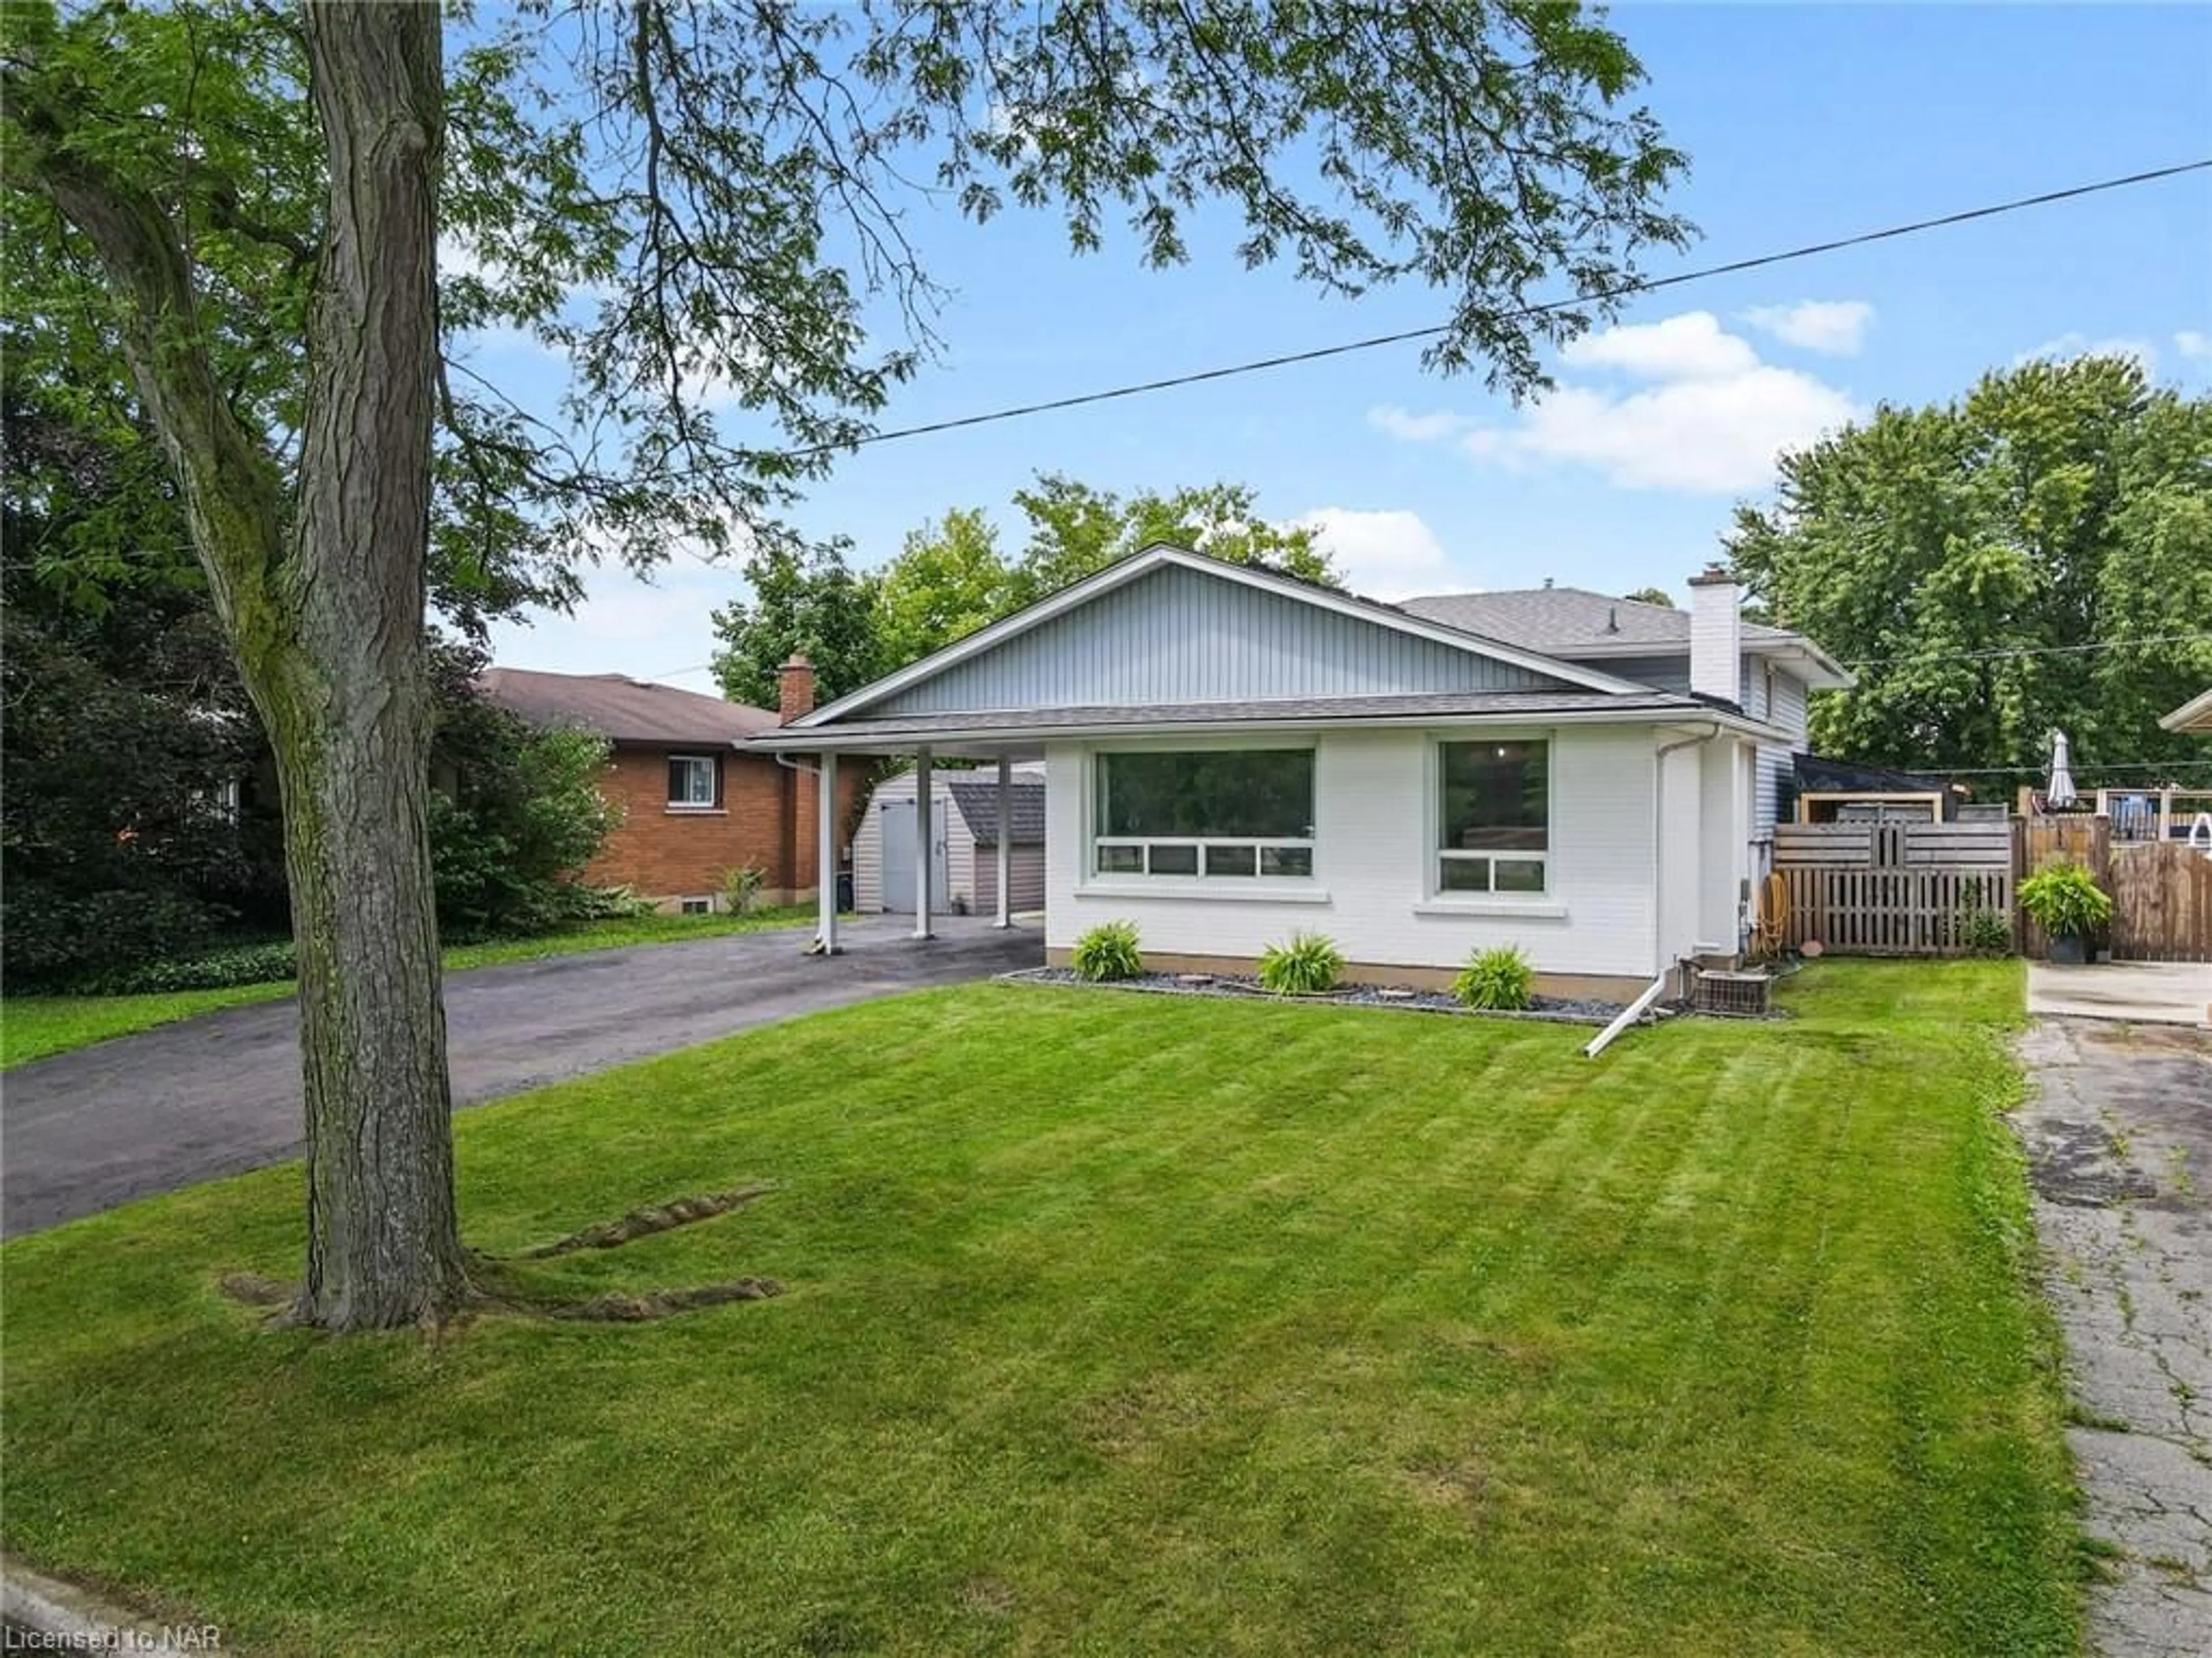 Frontside or backside of a home for 3327 Cattell Dr, Niagara Falls Ontario L2G 6N3